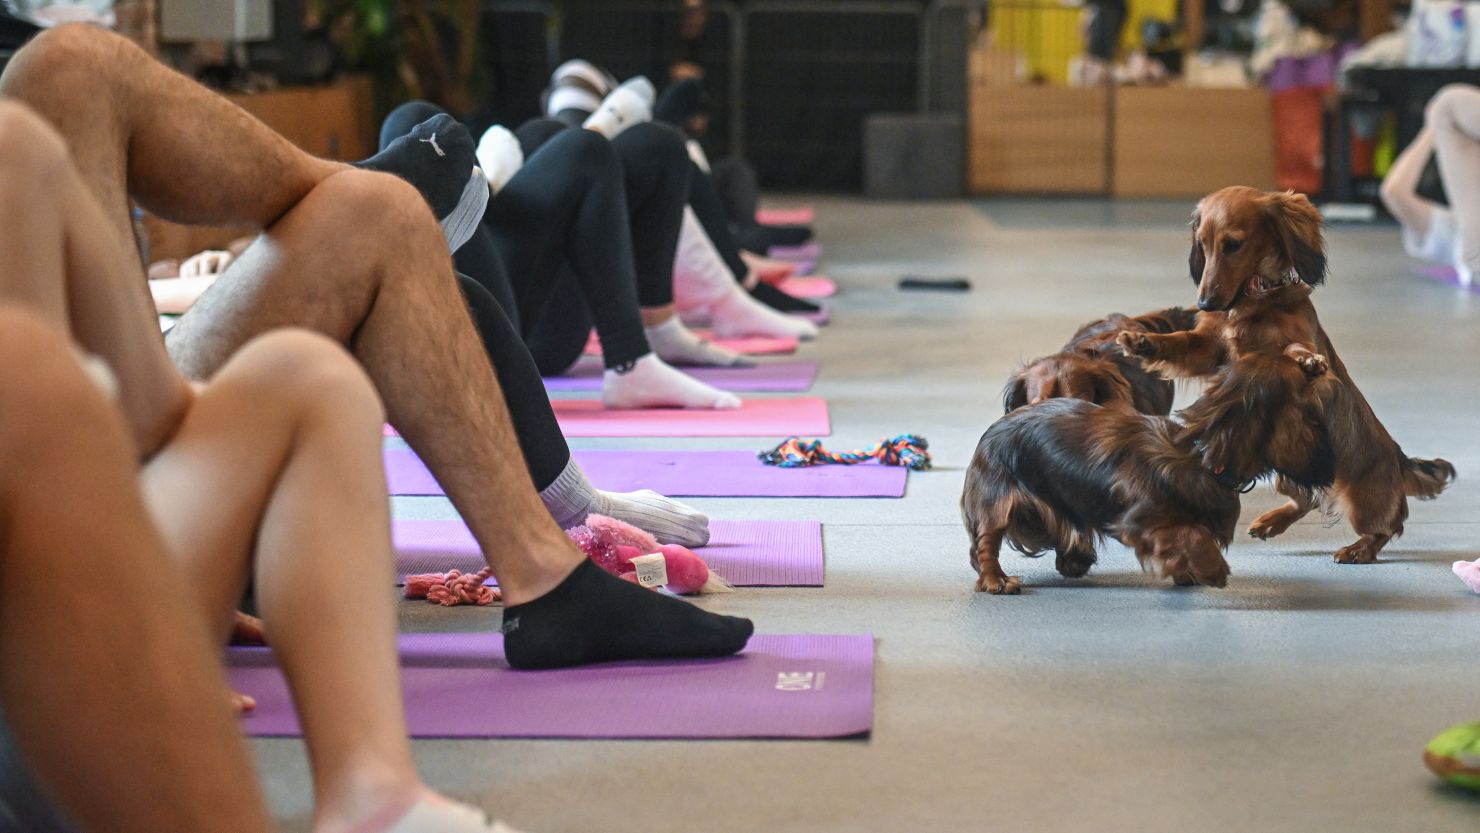 Italy has outlawed puppy yoga classes, which look like this one that took place in Krakow, Poland in June 2023.